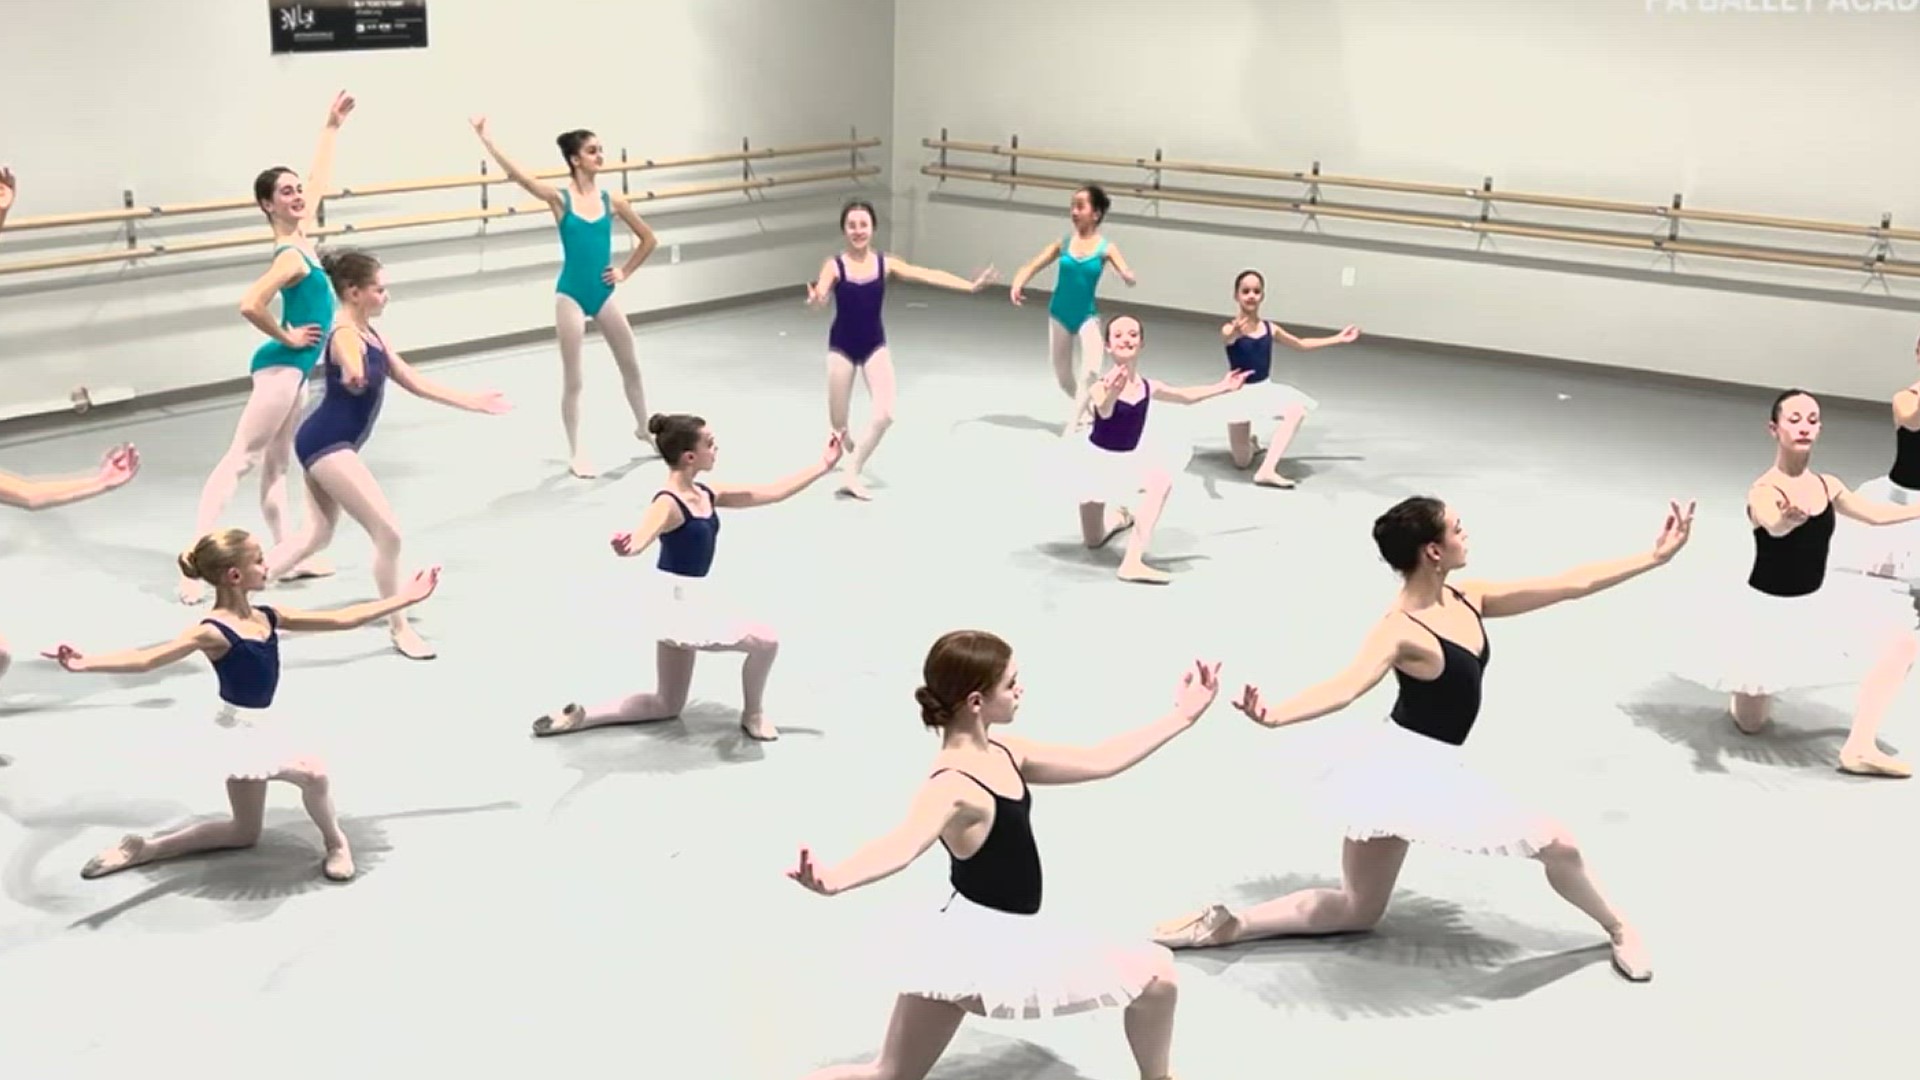 The Pennsylvania Ballet Academy is hard at work practicing for their June 3 performance of "Sleeping Beauty."